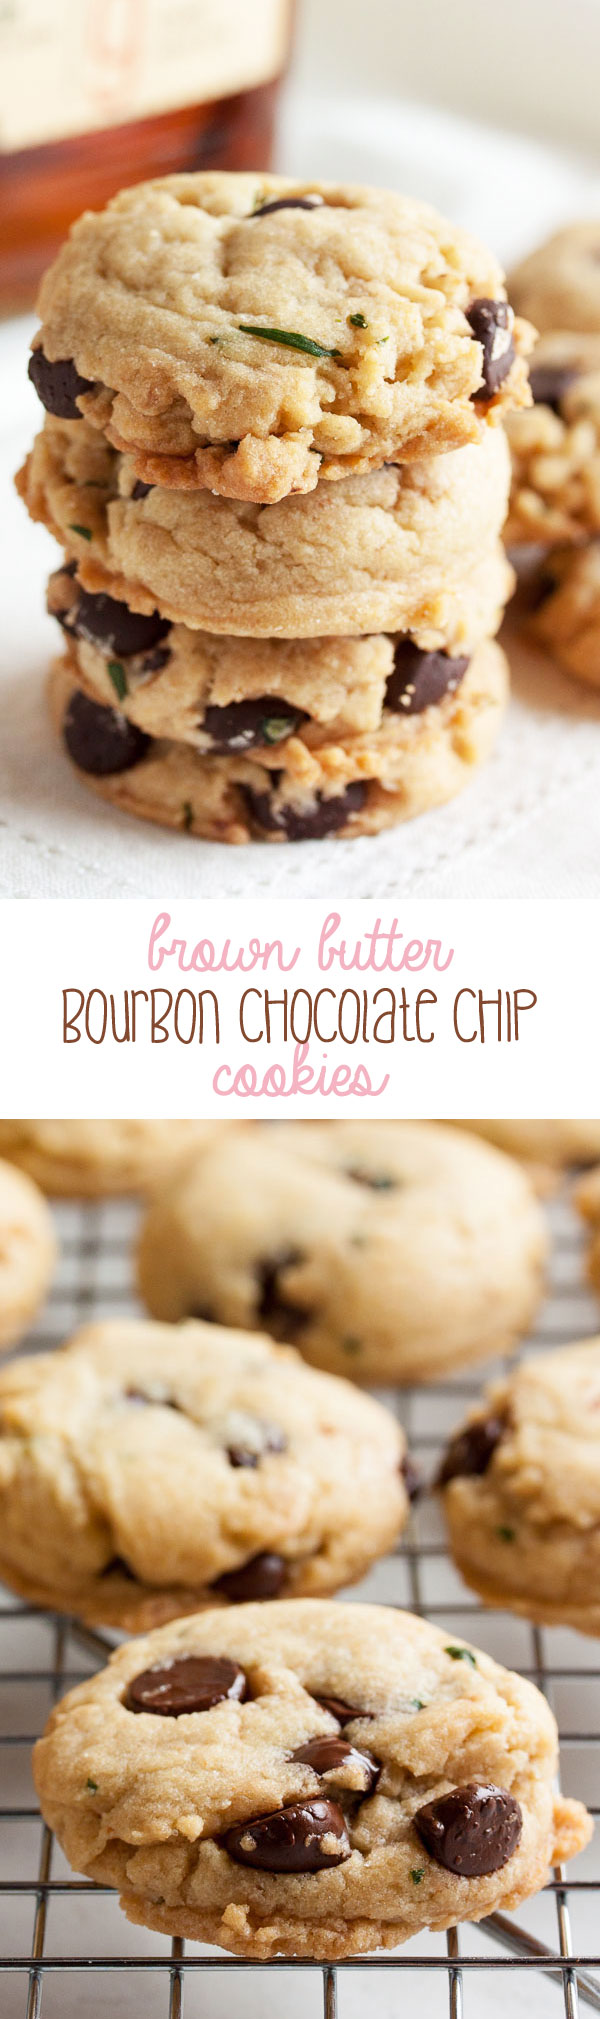 Made with browned butter, Kentucky bourbon, and fresh tarragon, these soft and gooey Bourbon Chocolate Chip Cookies have a great, rich flavour.